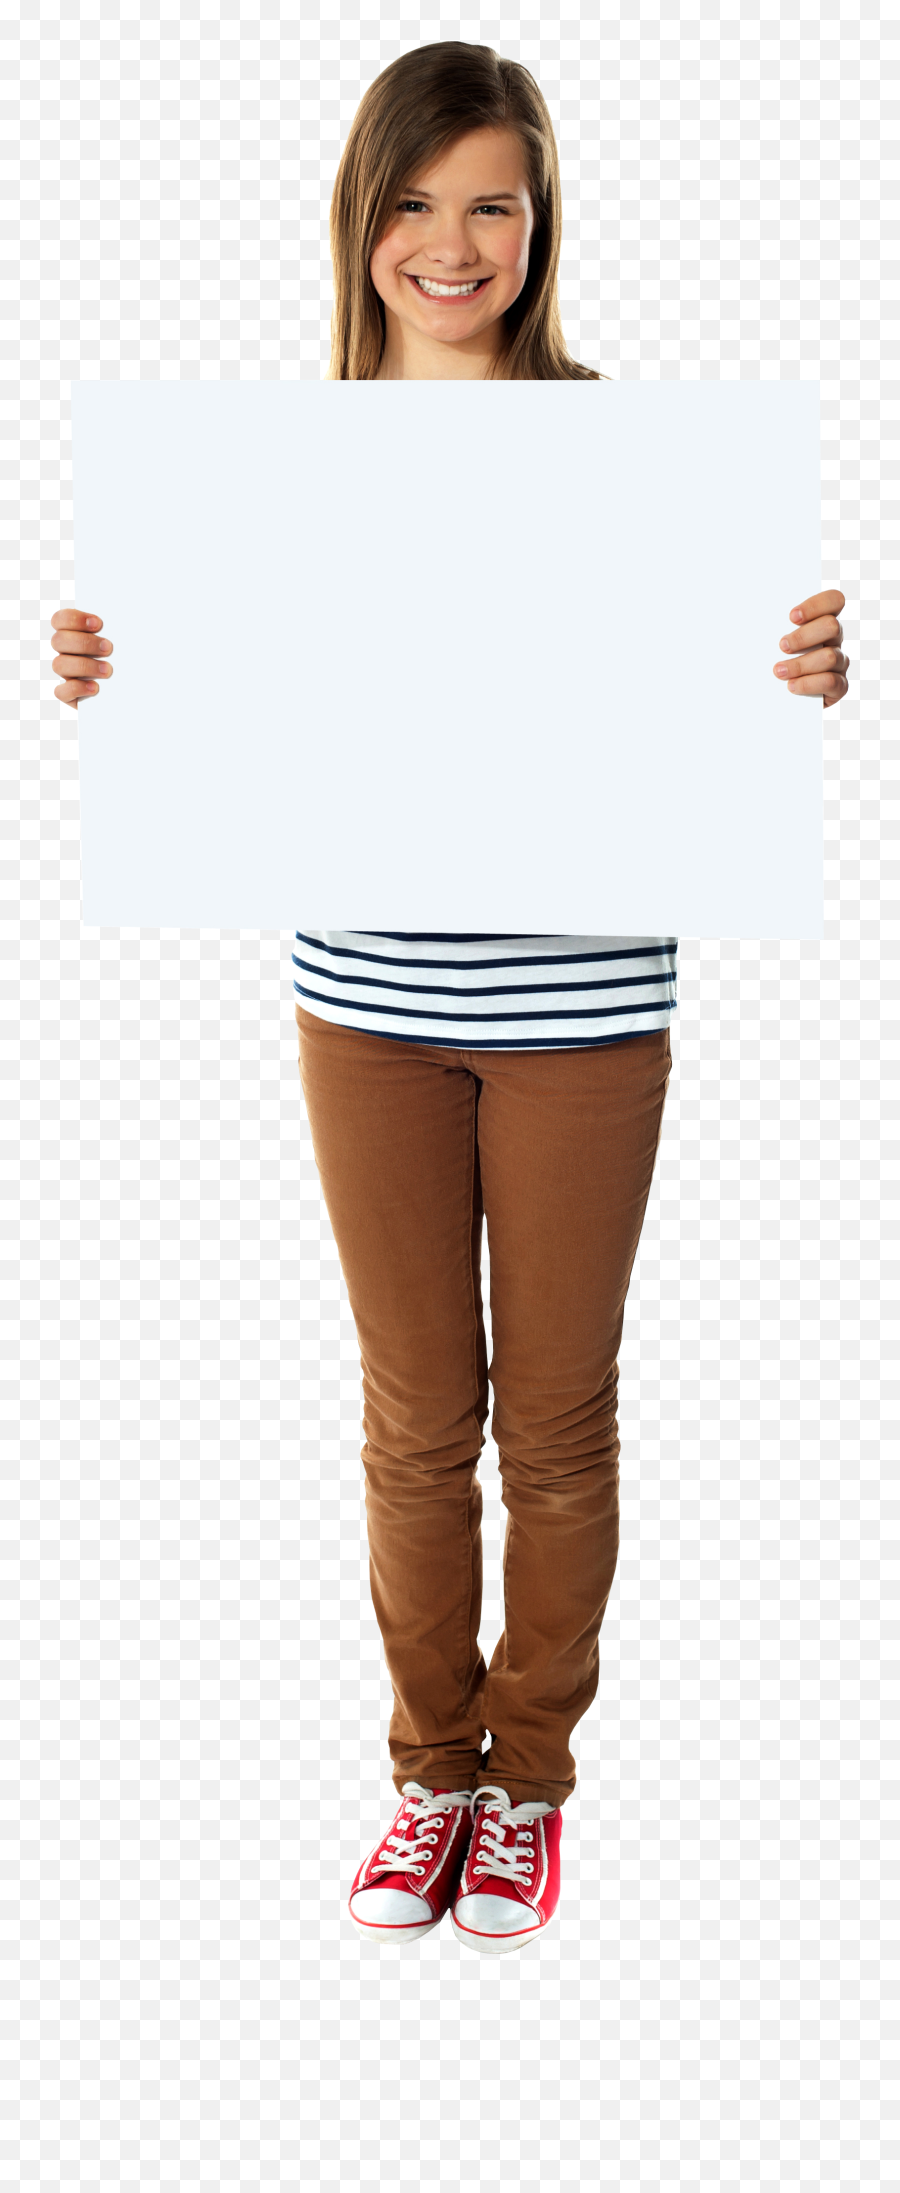 Girl Holding Banner Png Image - Purepng Free Transparent Girl Holding Something Transparent Background,Female Sign Png